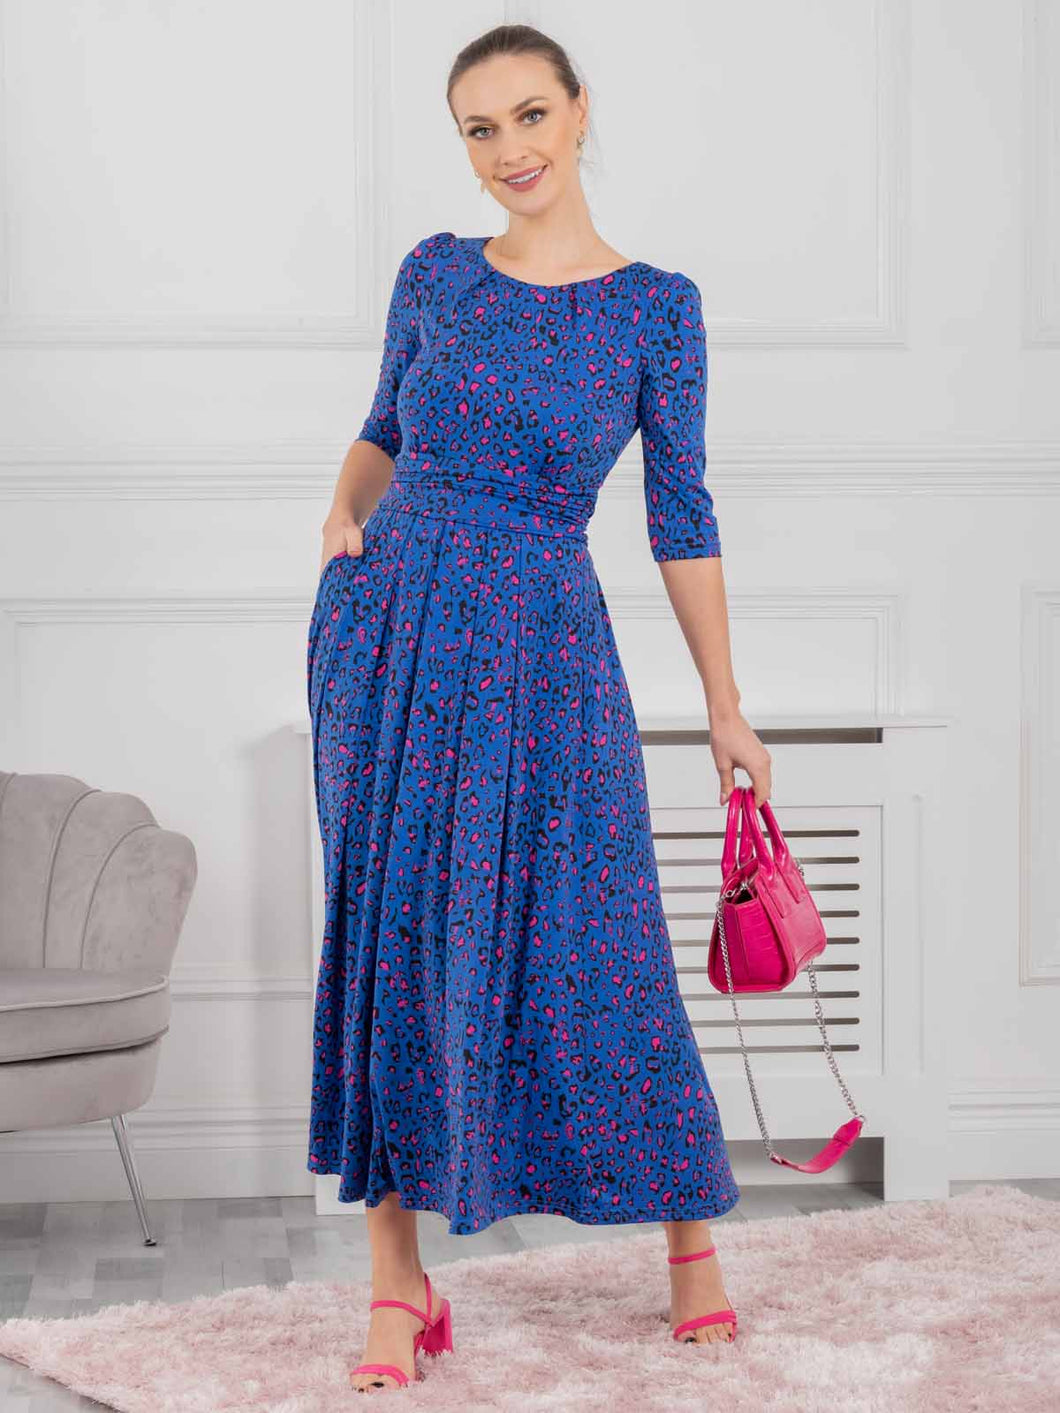 Cobalt Blue dress from Jolie Moi with pops of hot pink leopard print. Soft stretchy fabric - no zips. Round boat neckline, short sleeves to the elbow. Maxi length. Ruching at the waist and finished perfectly with pockets. 